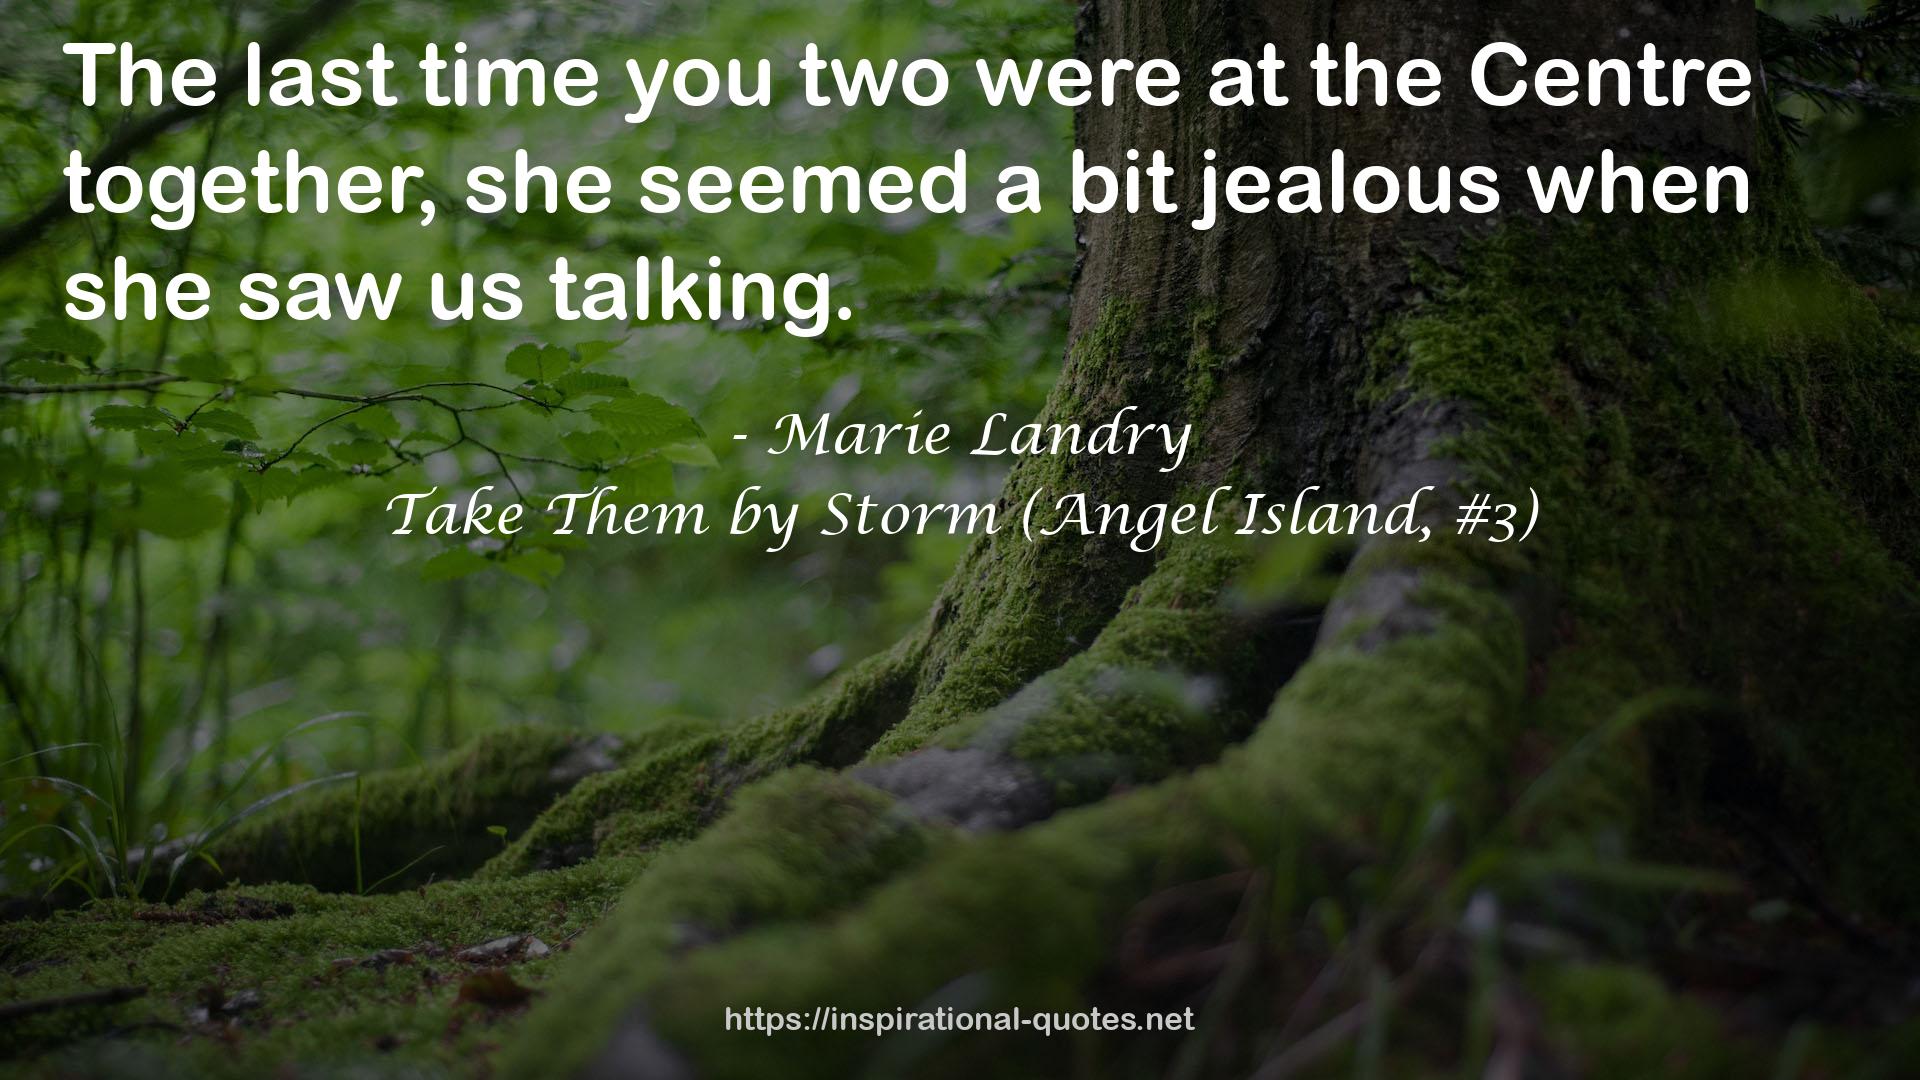 Take Them by Storm (Angel Island, #3) QUOTES